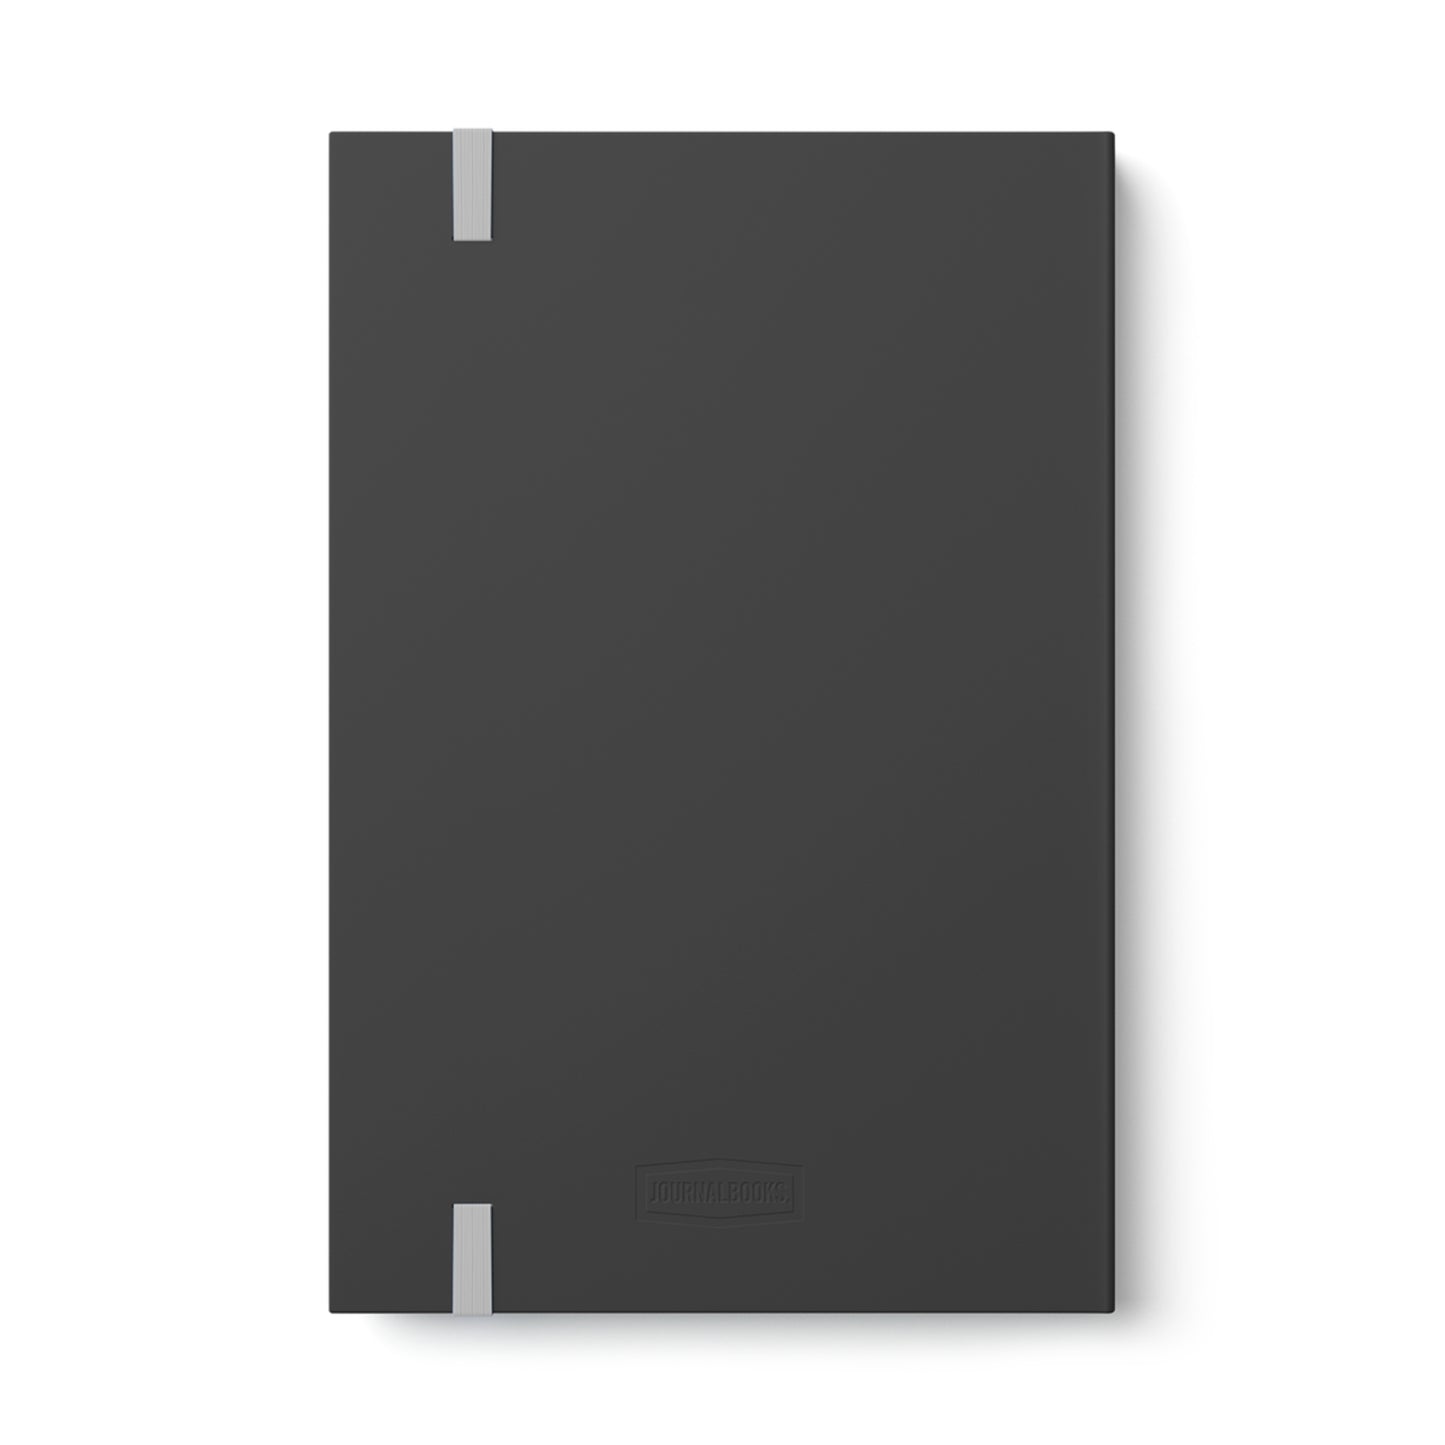 Love Letter. Contrast Notebook - Ruled